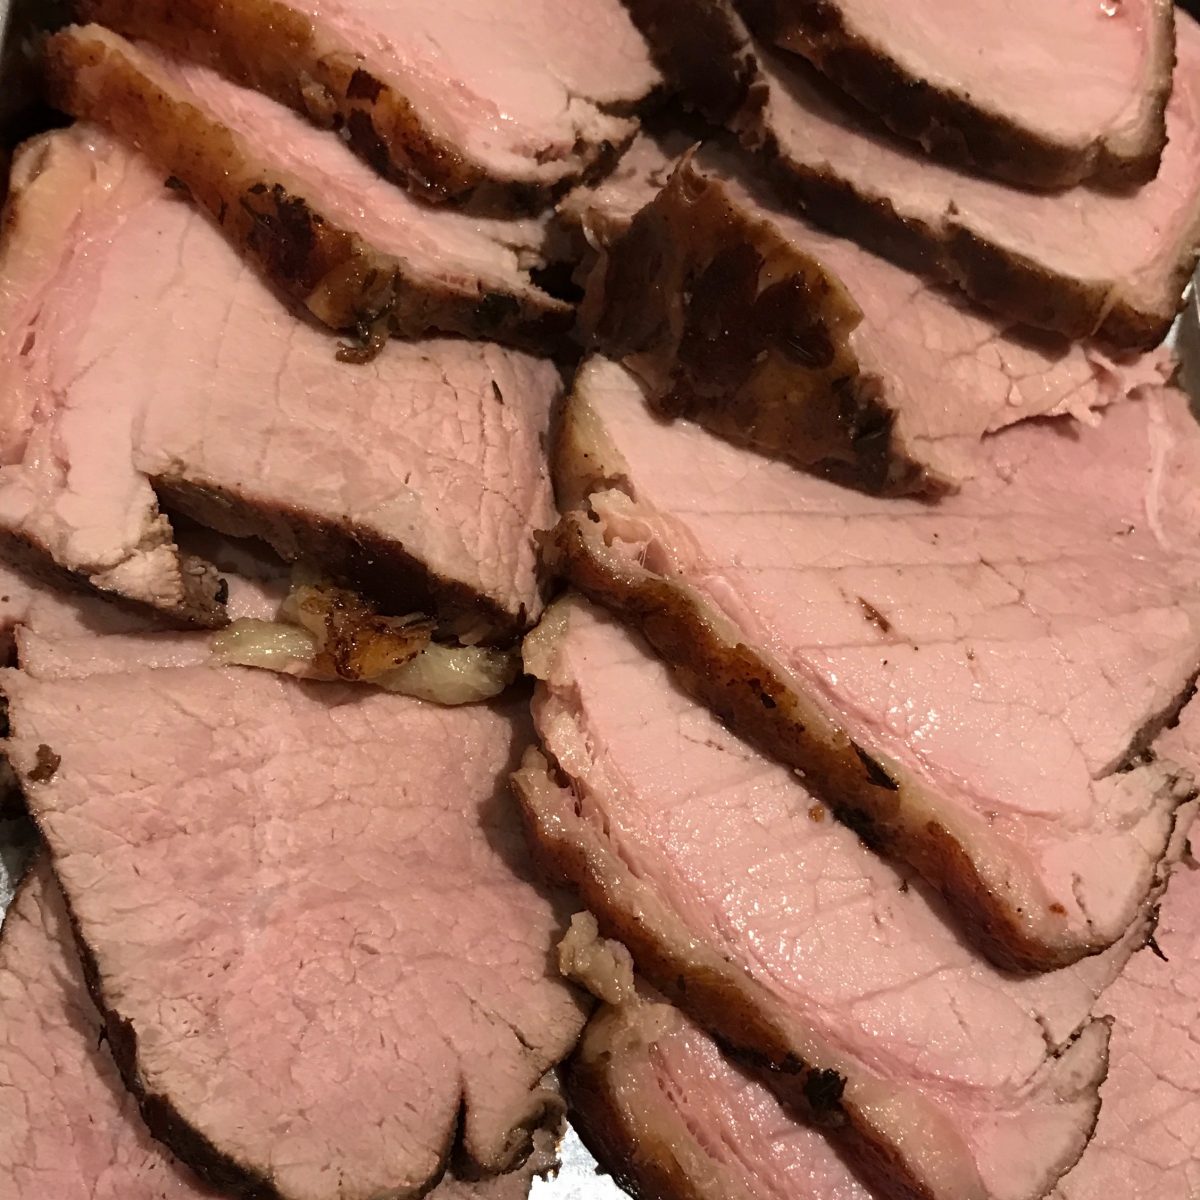 30-hour Sous Vide Whole Beef Eye of Round Roast